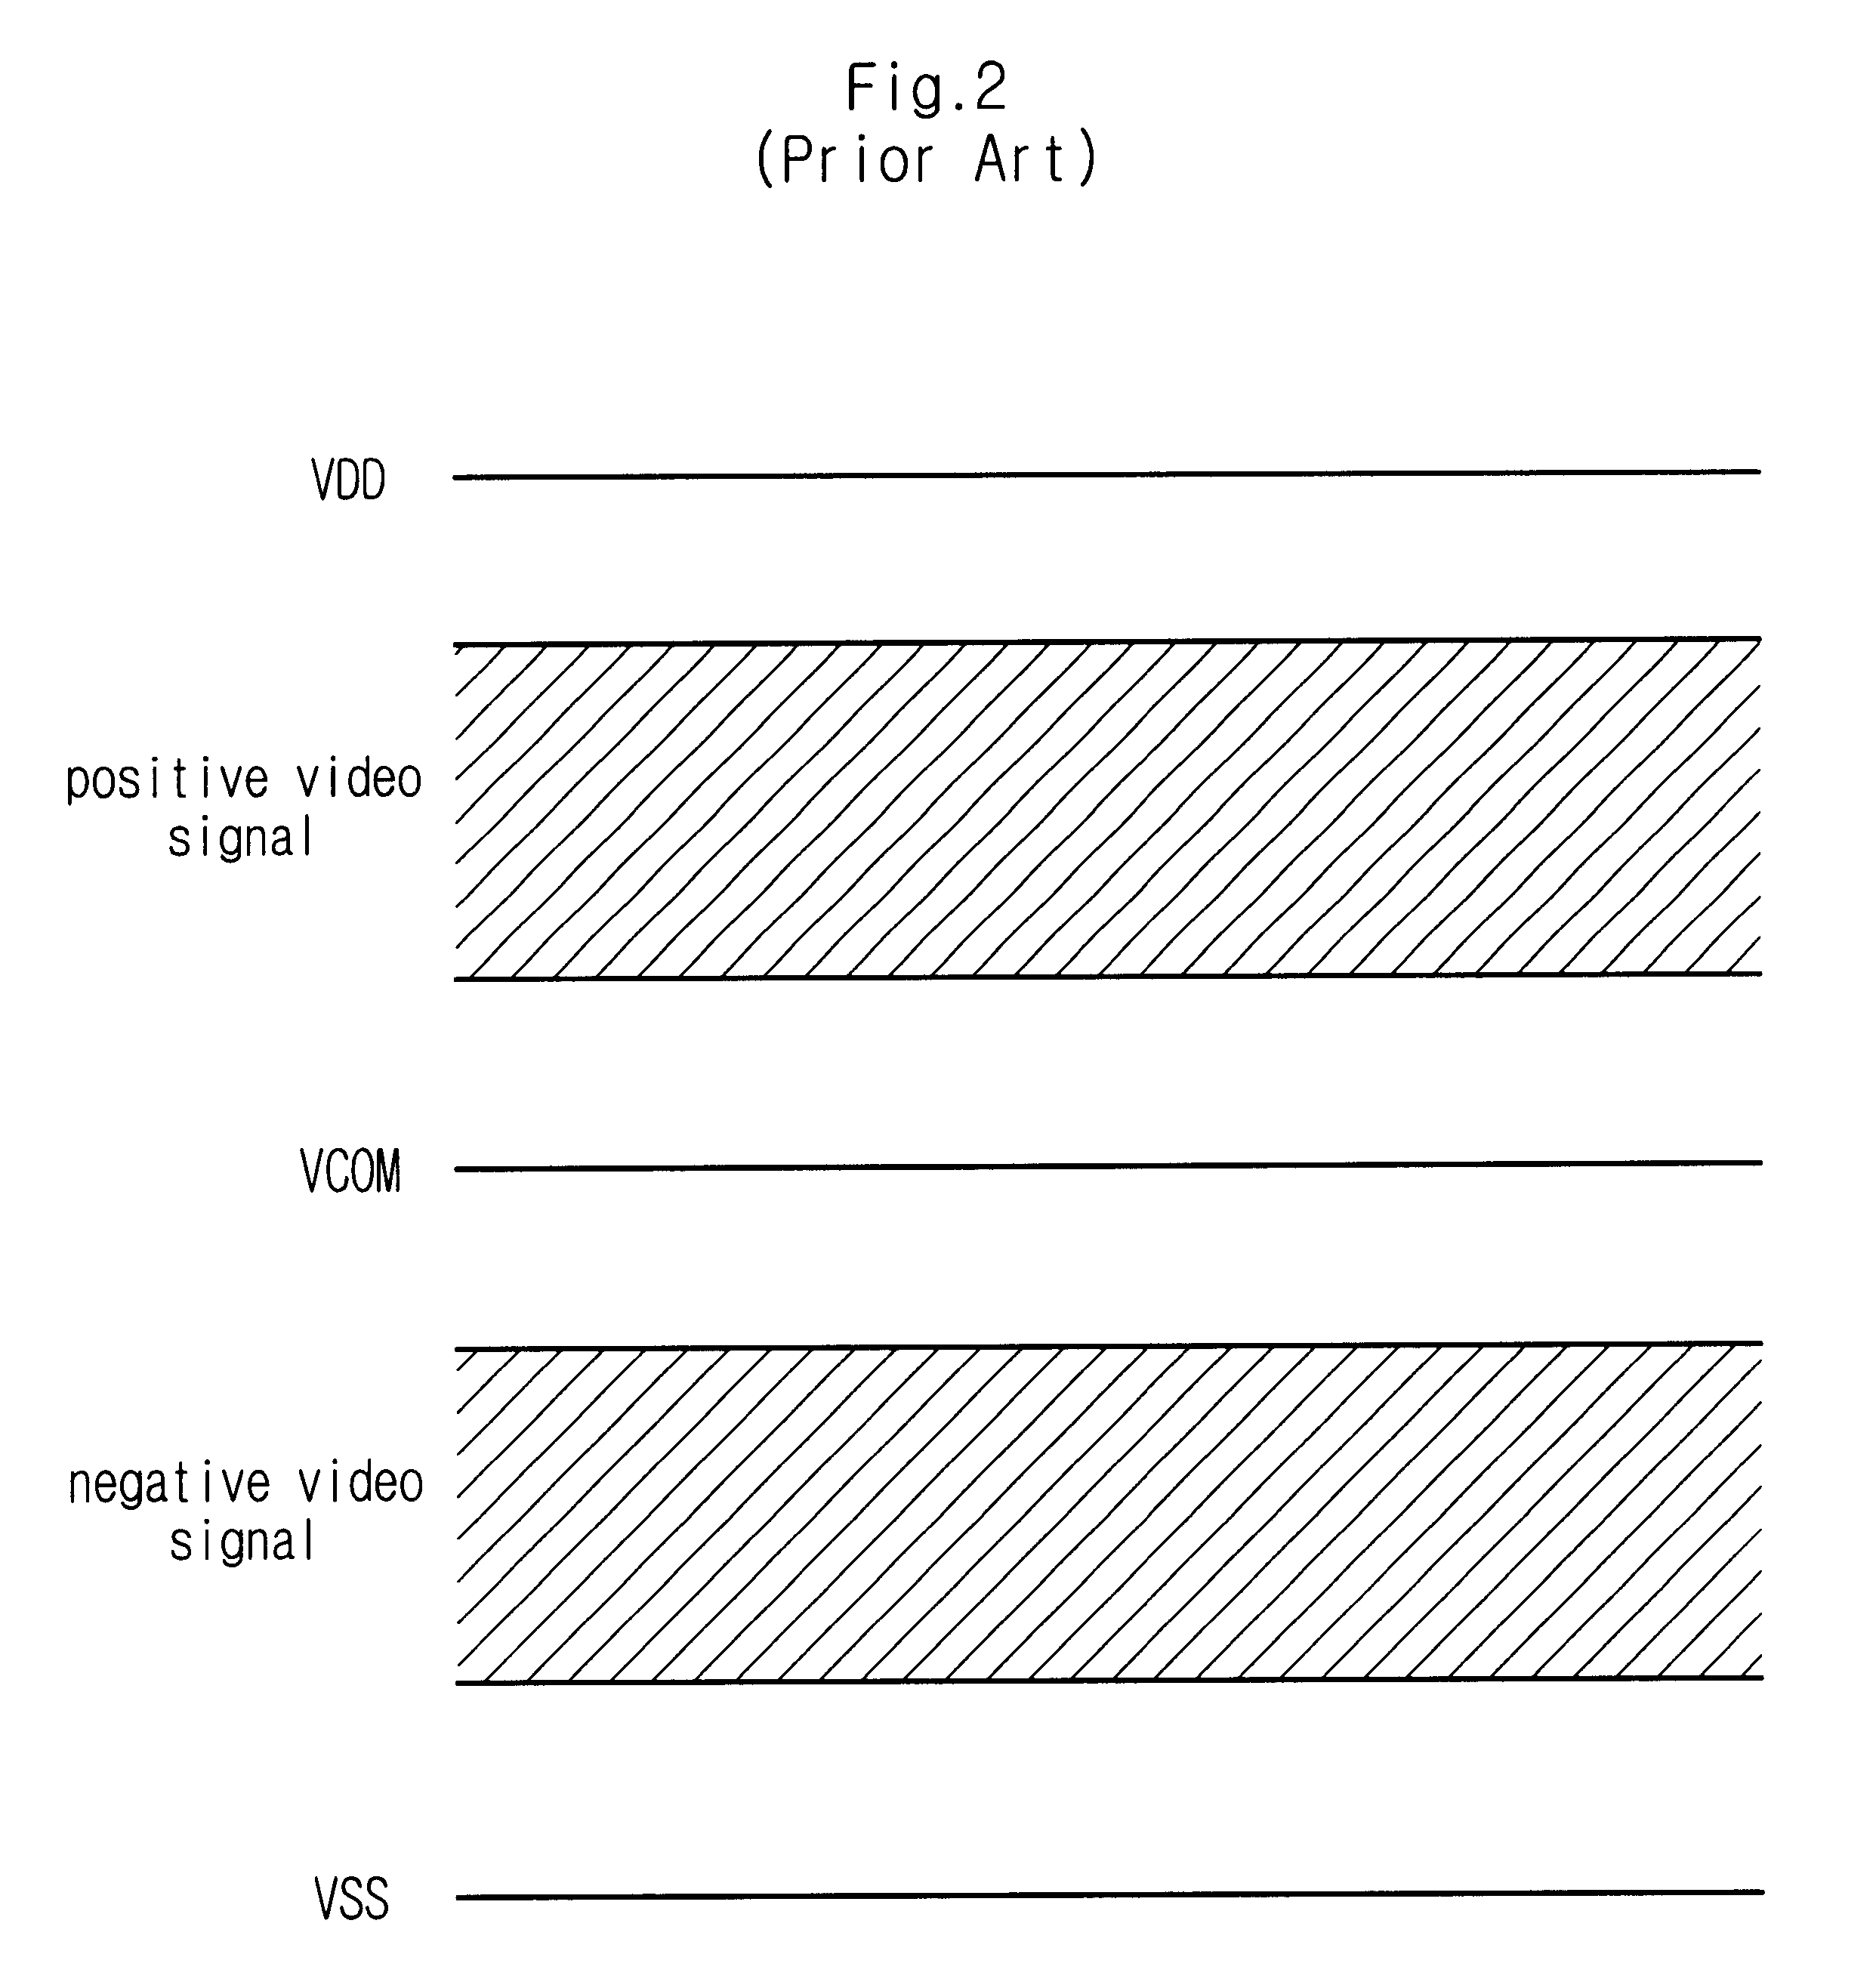 TFT-LCD using multi-phase charge sharing